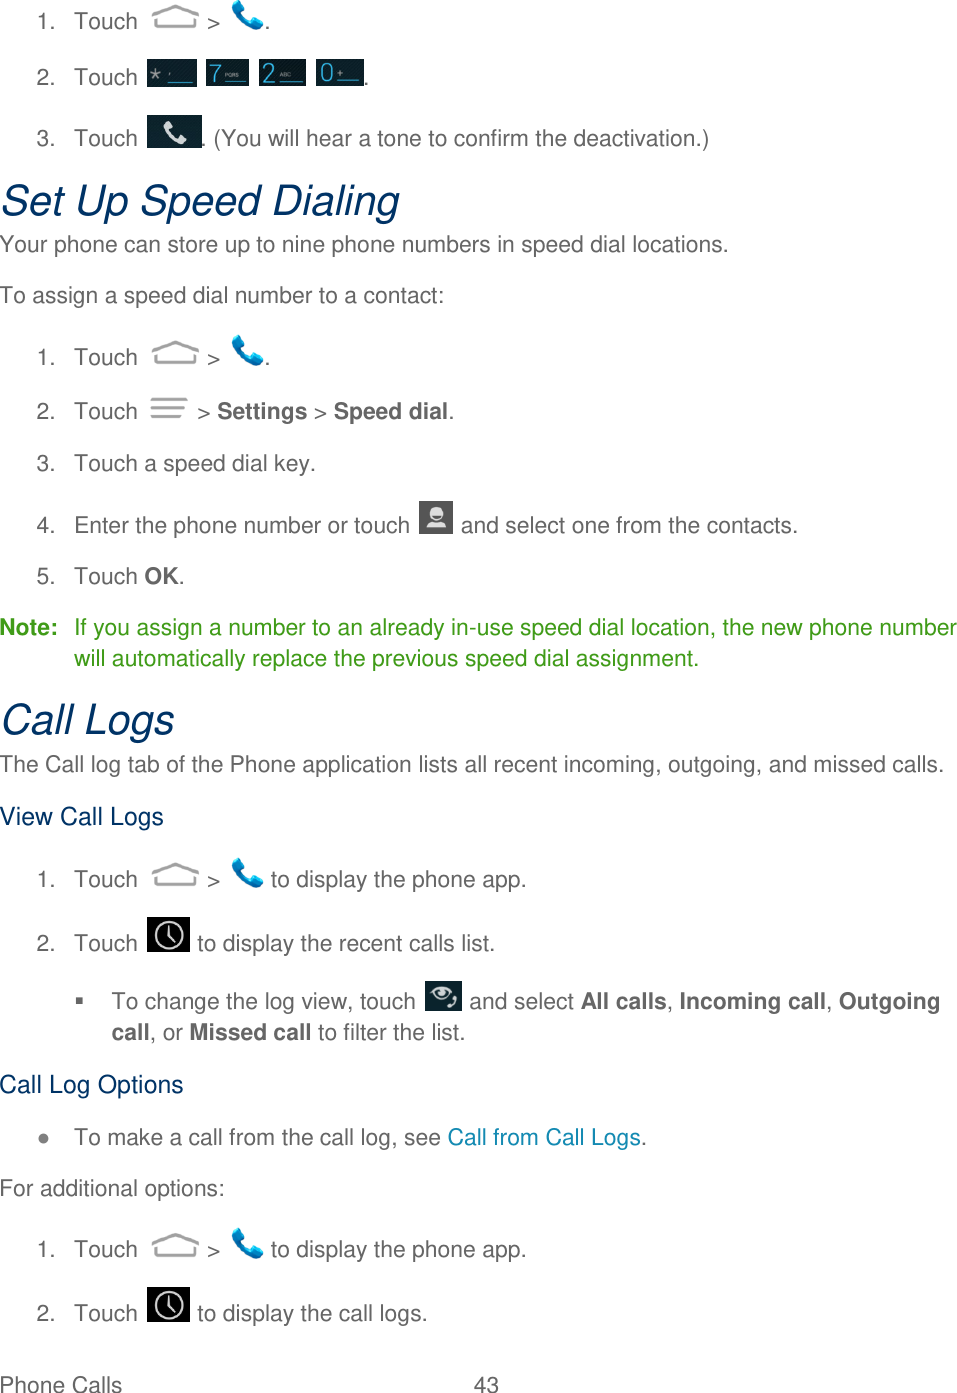 Phone Calls  43   1.  Touch   &gt;  . 2.  Touch        . 3.  Touch  . (You will hear a tone to confirm the deactivation.) Set Up Speed Dialing Your phone can store up to nine phone numbers in speed dial locations. To assign a speed dial number to a contact: 1.  Touch   &gt;  . 2.  Touch   &gt; Settings &gt; Speed dial. 3.  Touch a speed dial key. 4.  Enter the phone number or touch   and select one from the contacts. 5.  Touch OK. Note:  If you assign a number to an already in-use speed dial location, the new phone number will automatically replace the previous speed dial assignment.  Call Logs The Call log tab of the Phone application lists all recent incoming, outgoing, and missed calls. View Call Logs 1.  Touch   &gt;   to display the phone app. 2.  Touch   to display the recent calls list.   To change the log view, touch   and select All calls, Incoming call, Outgoing call, or Missed call to filter the list. Call Log Options ● To make a call from the call log, see Call from Call Logs. For additional options: 1.  Touch   &gt;   to display the phone app. 2.  Touch   to display the call logs. 